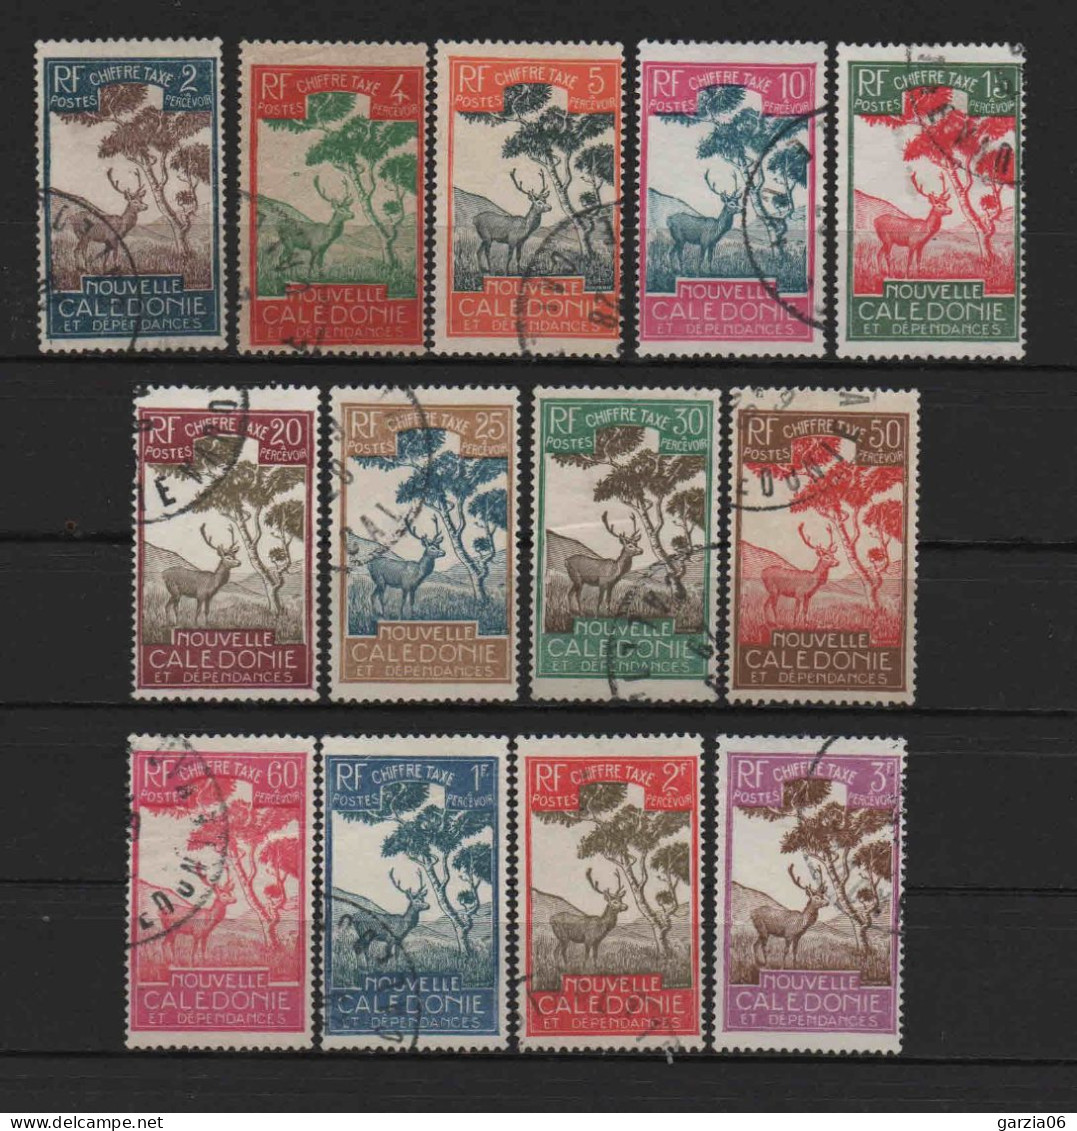 Nouvelle Calédonie - 1928 - Tb Taxe - N° 26 à 38  - Oblit- Used - Timbres-taxe